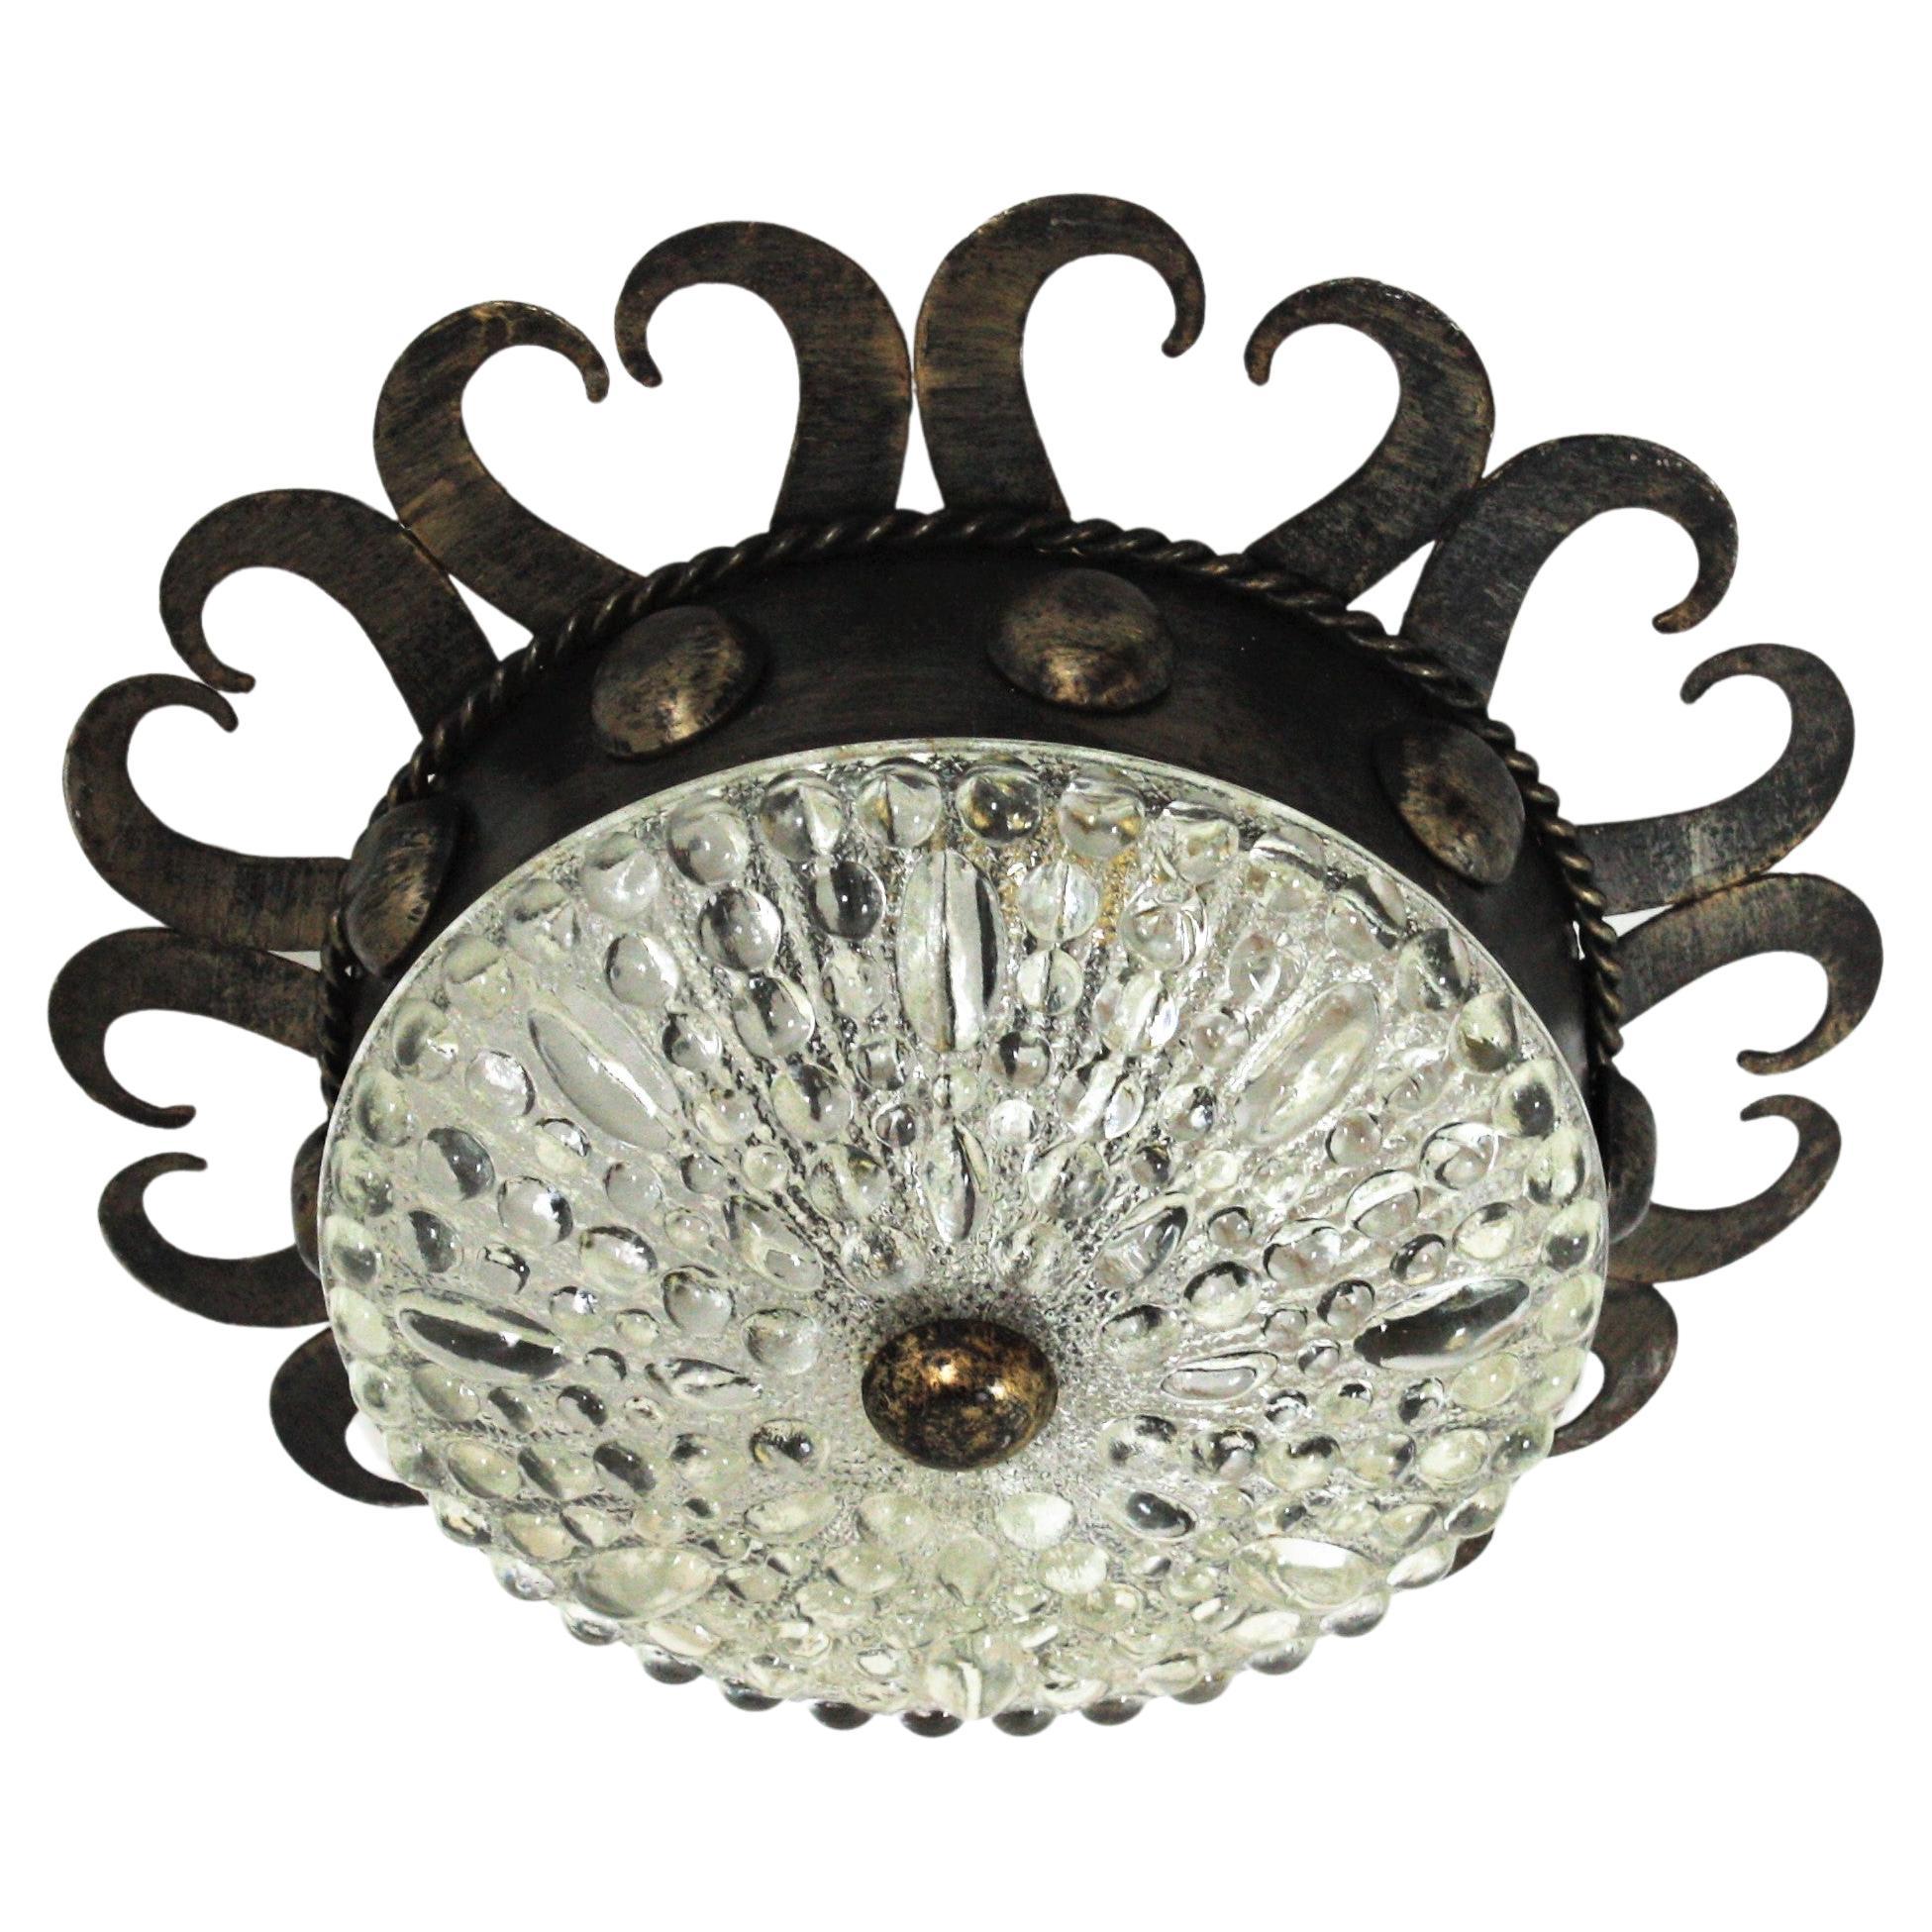 Eye-catching iron and glass crown flush mount with scrolled and ball details, Spain, 1950s.
This light fixture has an interesting design combining scroll and geometric accents. The patinated iron frame has sunburst disposition and scroll endings